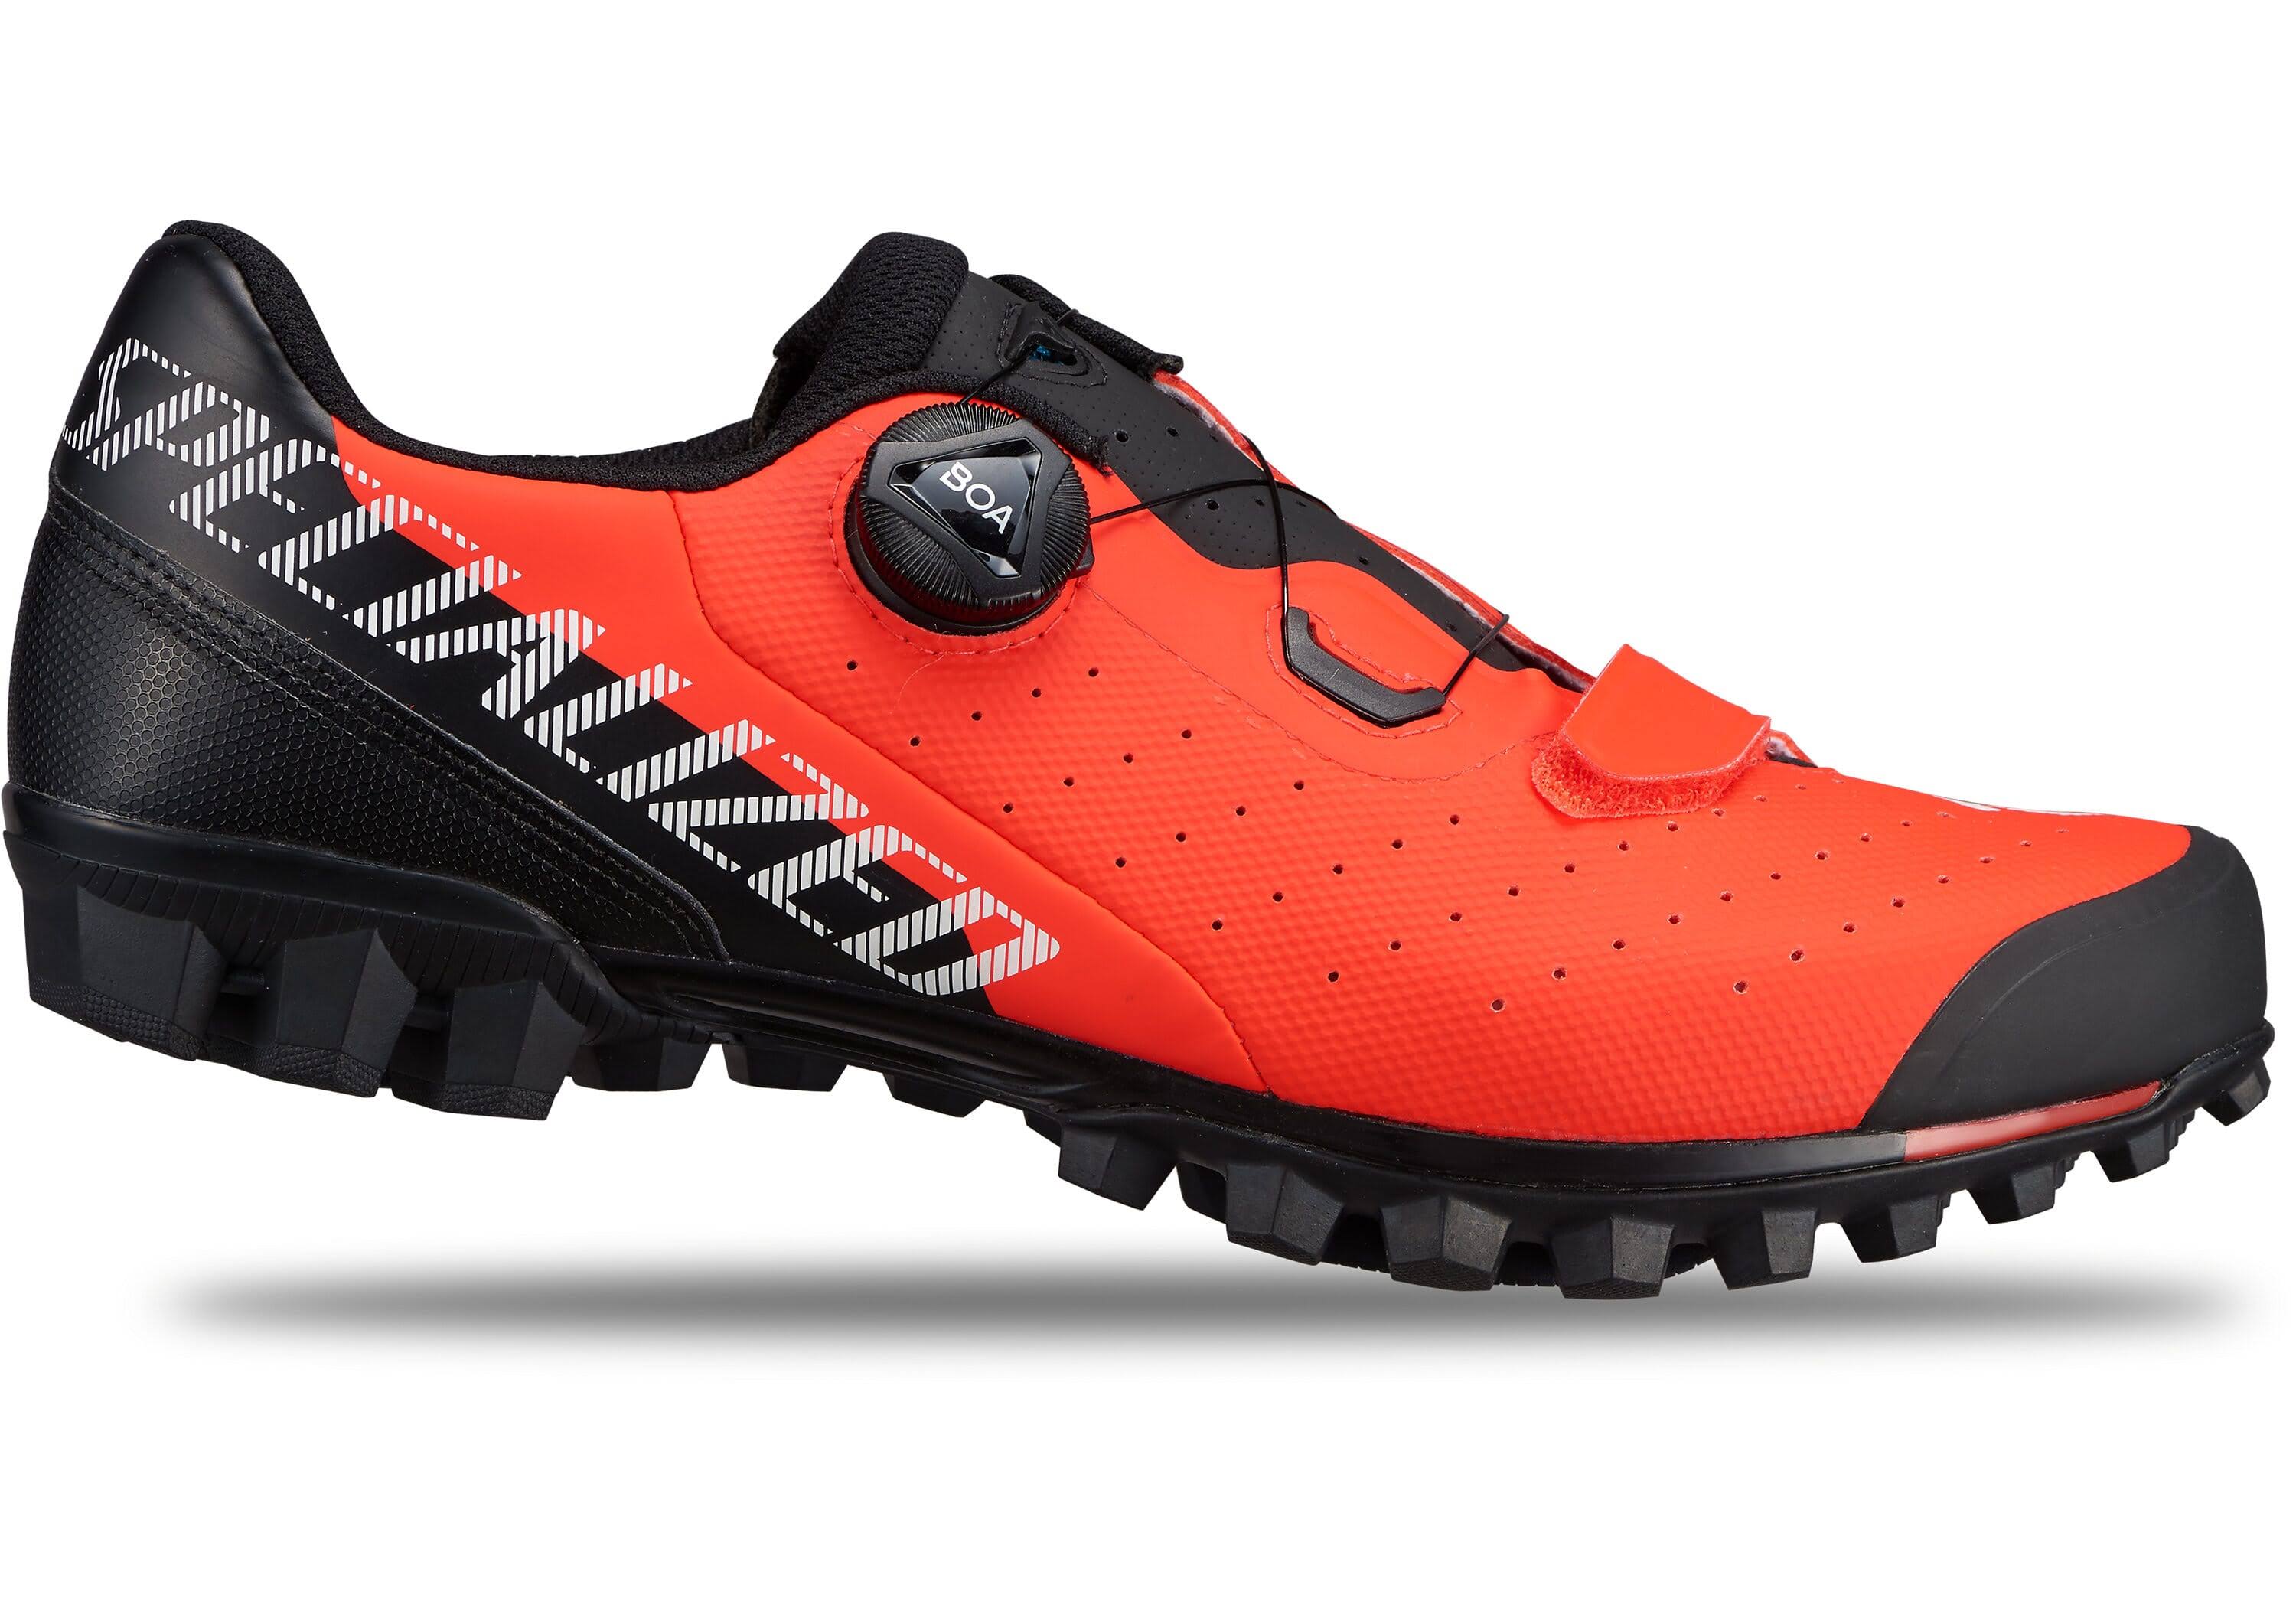 Specialized Recon 2.0 Mountain Bike Shoes - Red